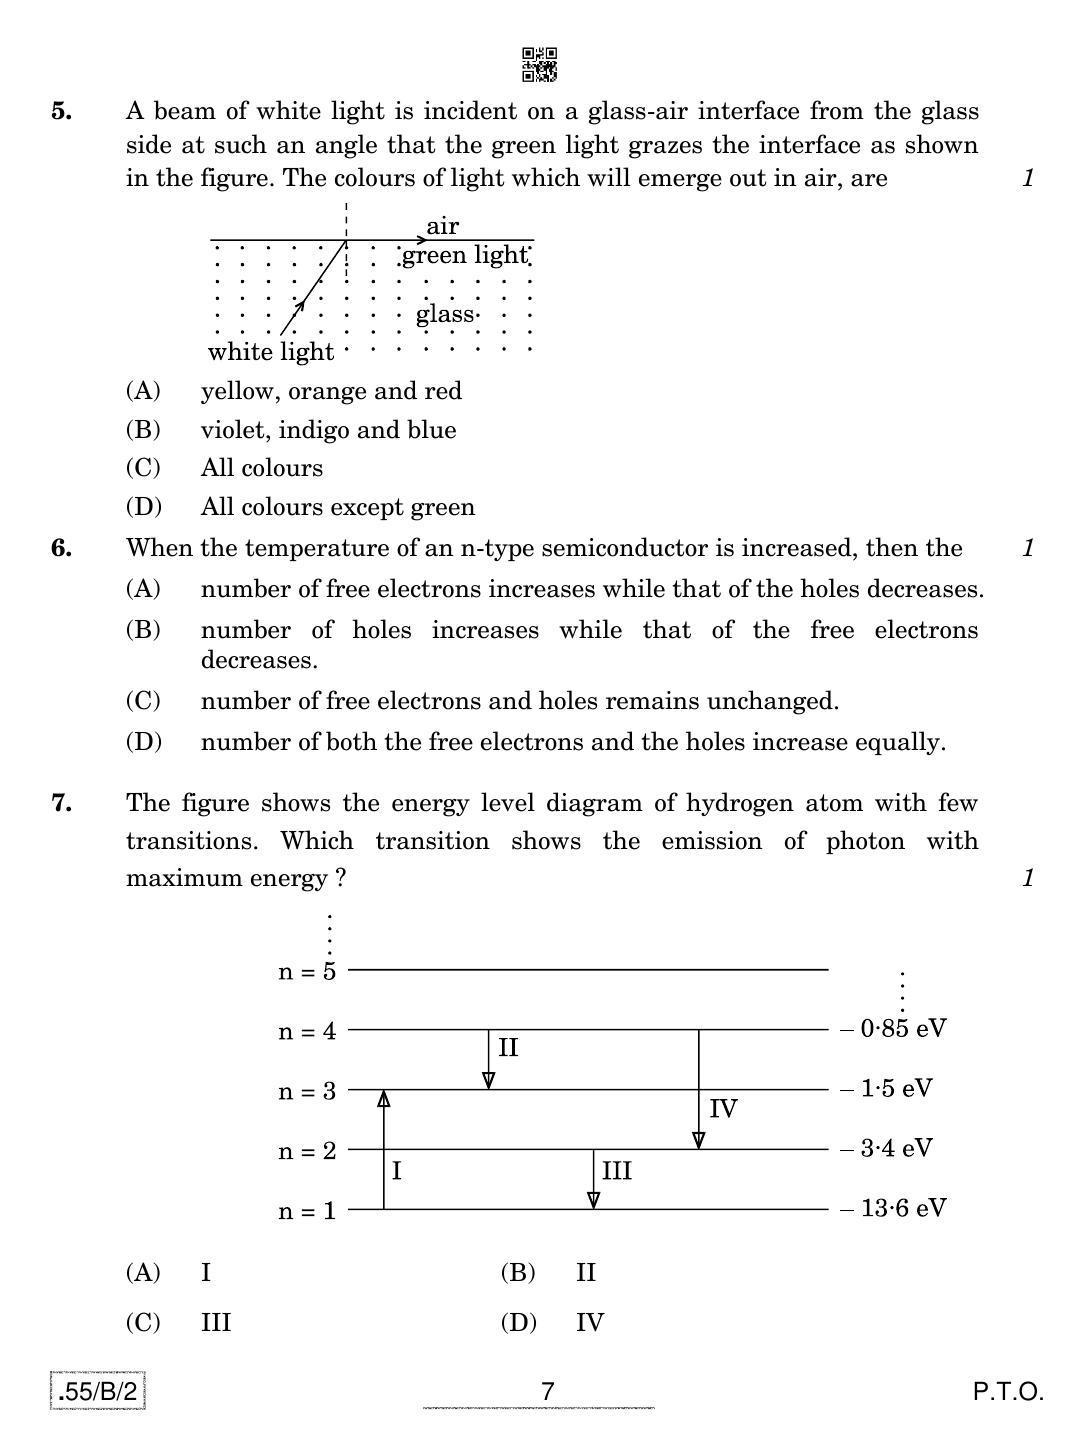 CBSE Class 12 55-C-2 - Physics 2020 Compartment Question Paper - Page 7